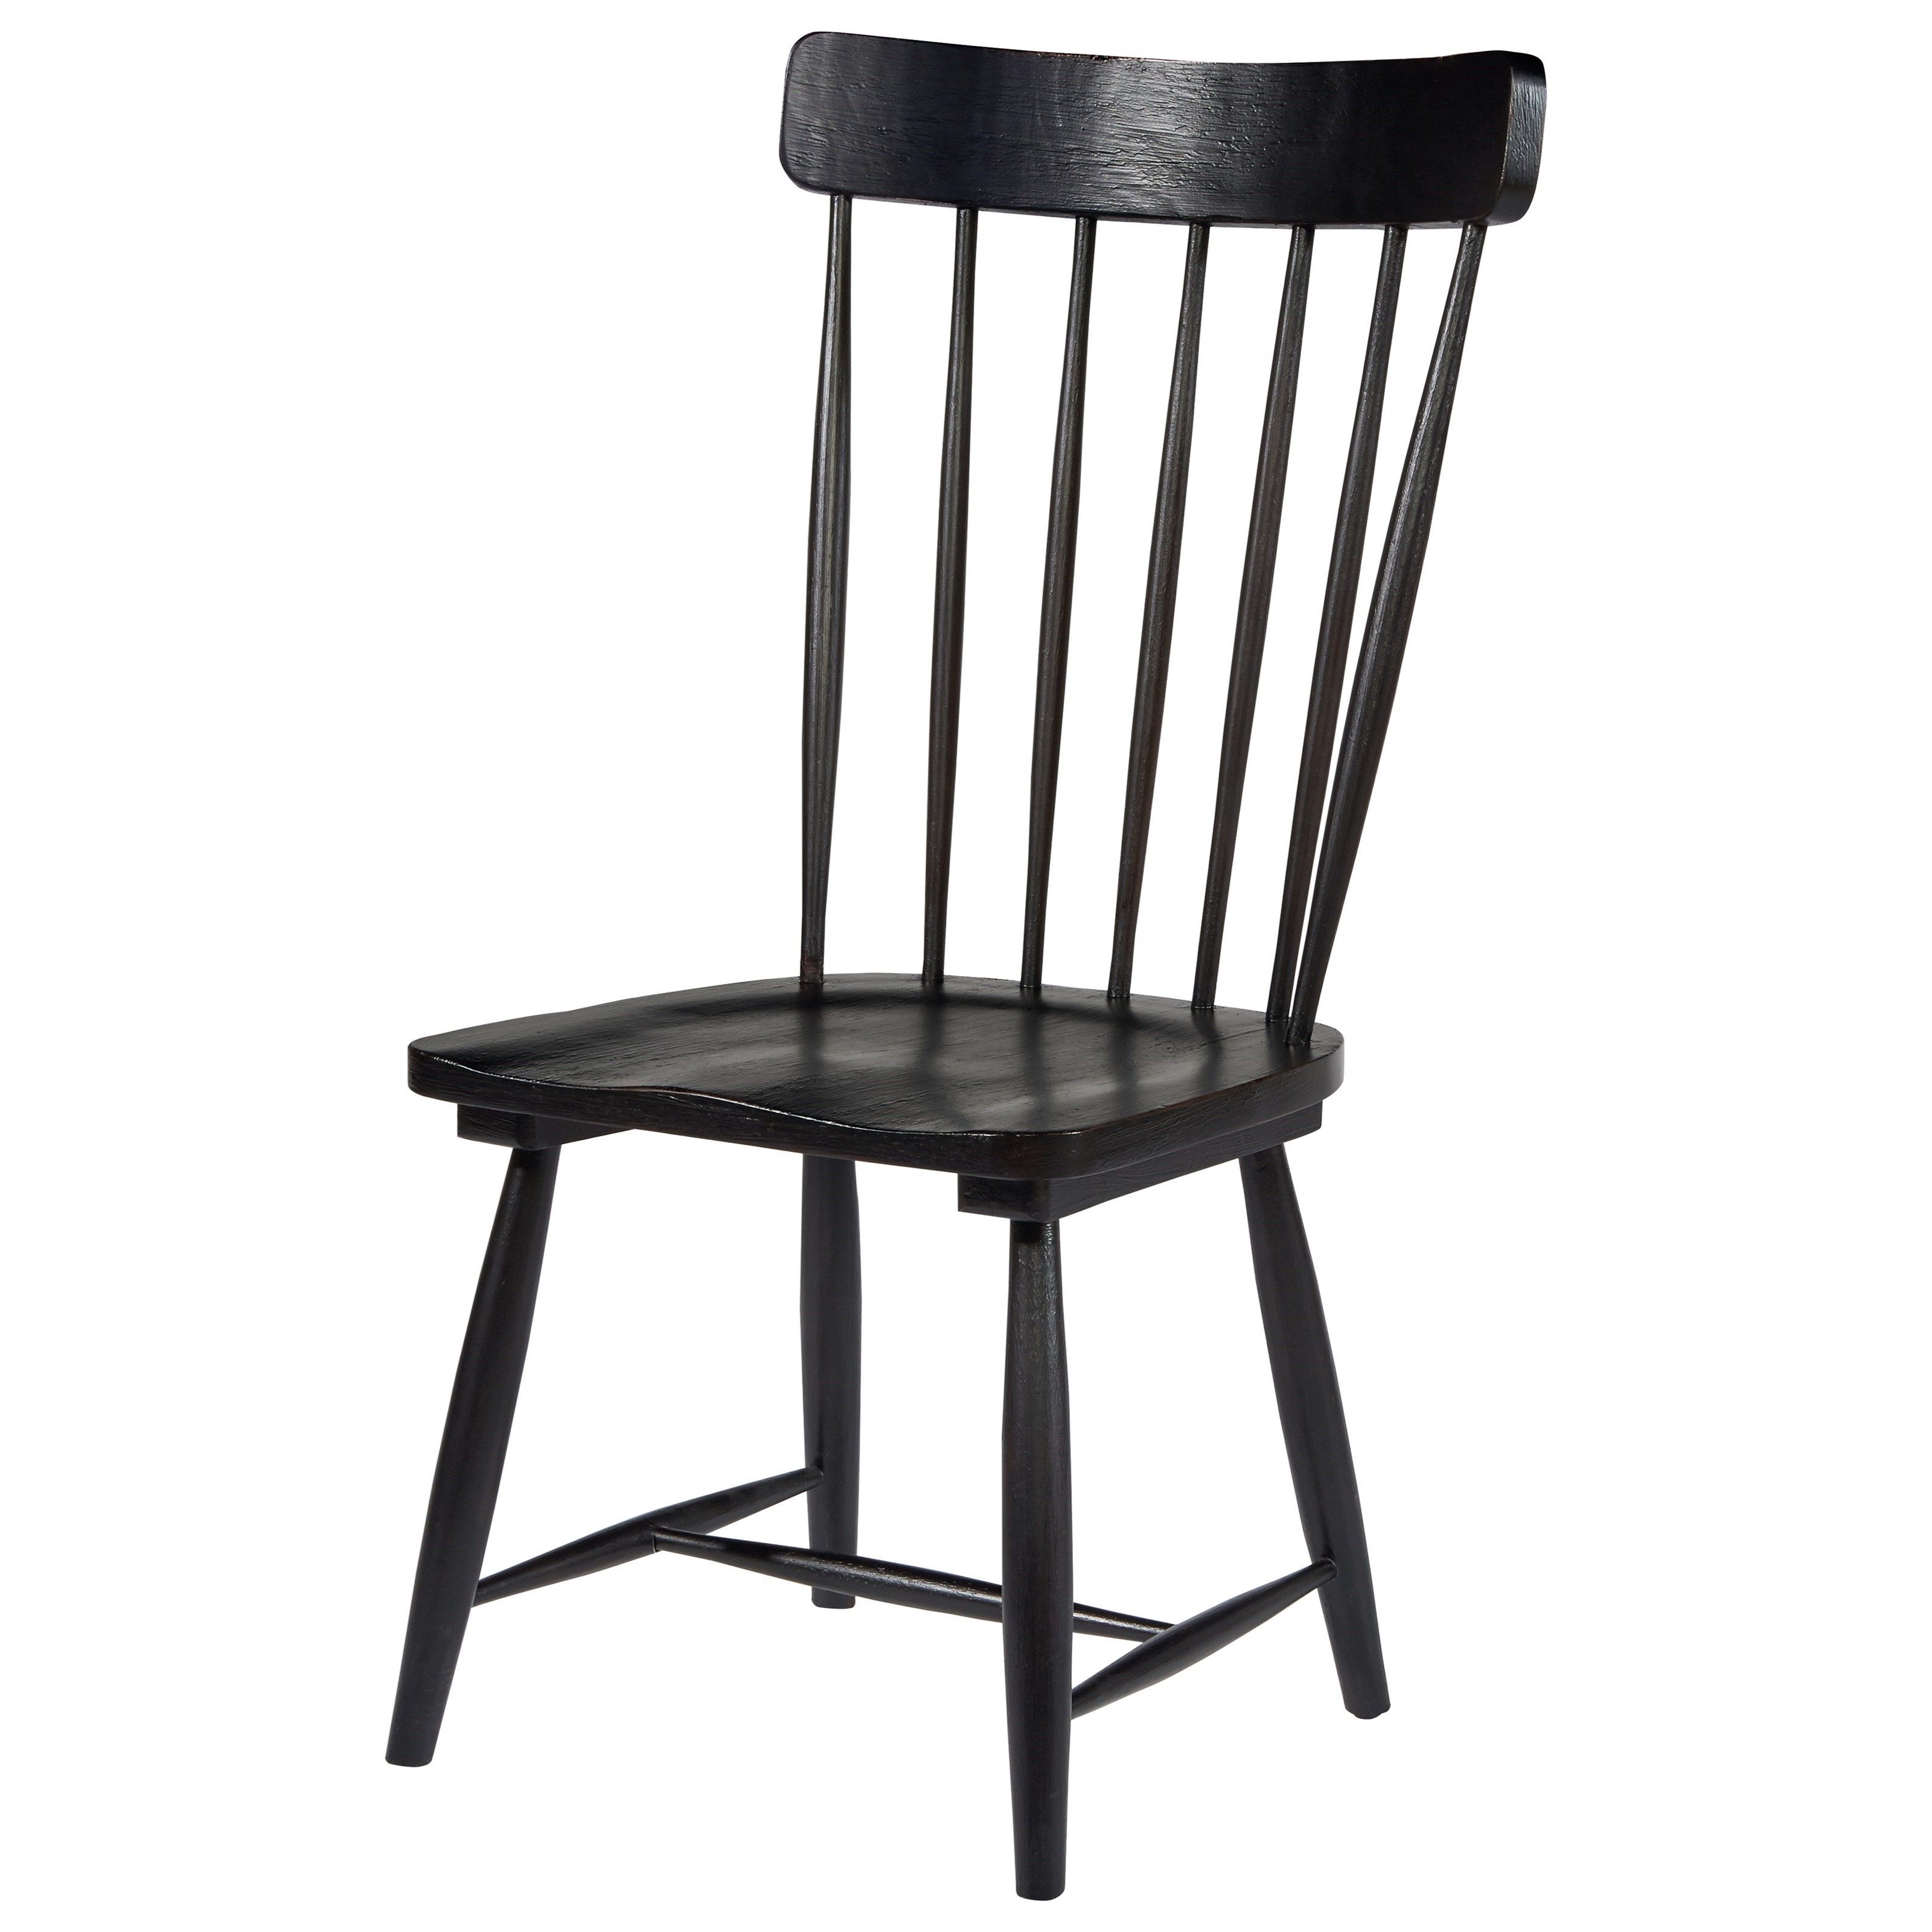 Magnolia Homejoanna Gaines Farmhouse Spindle Back Side Chair In Best And Newest Magnolia Home Spindle Back Side Chairs (Photo 2 of 20)